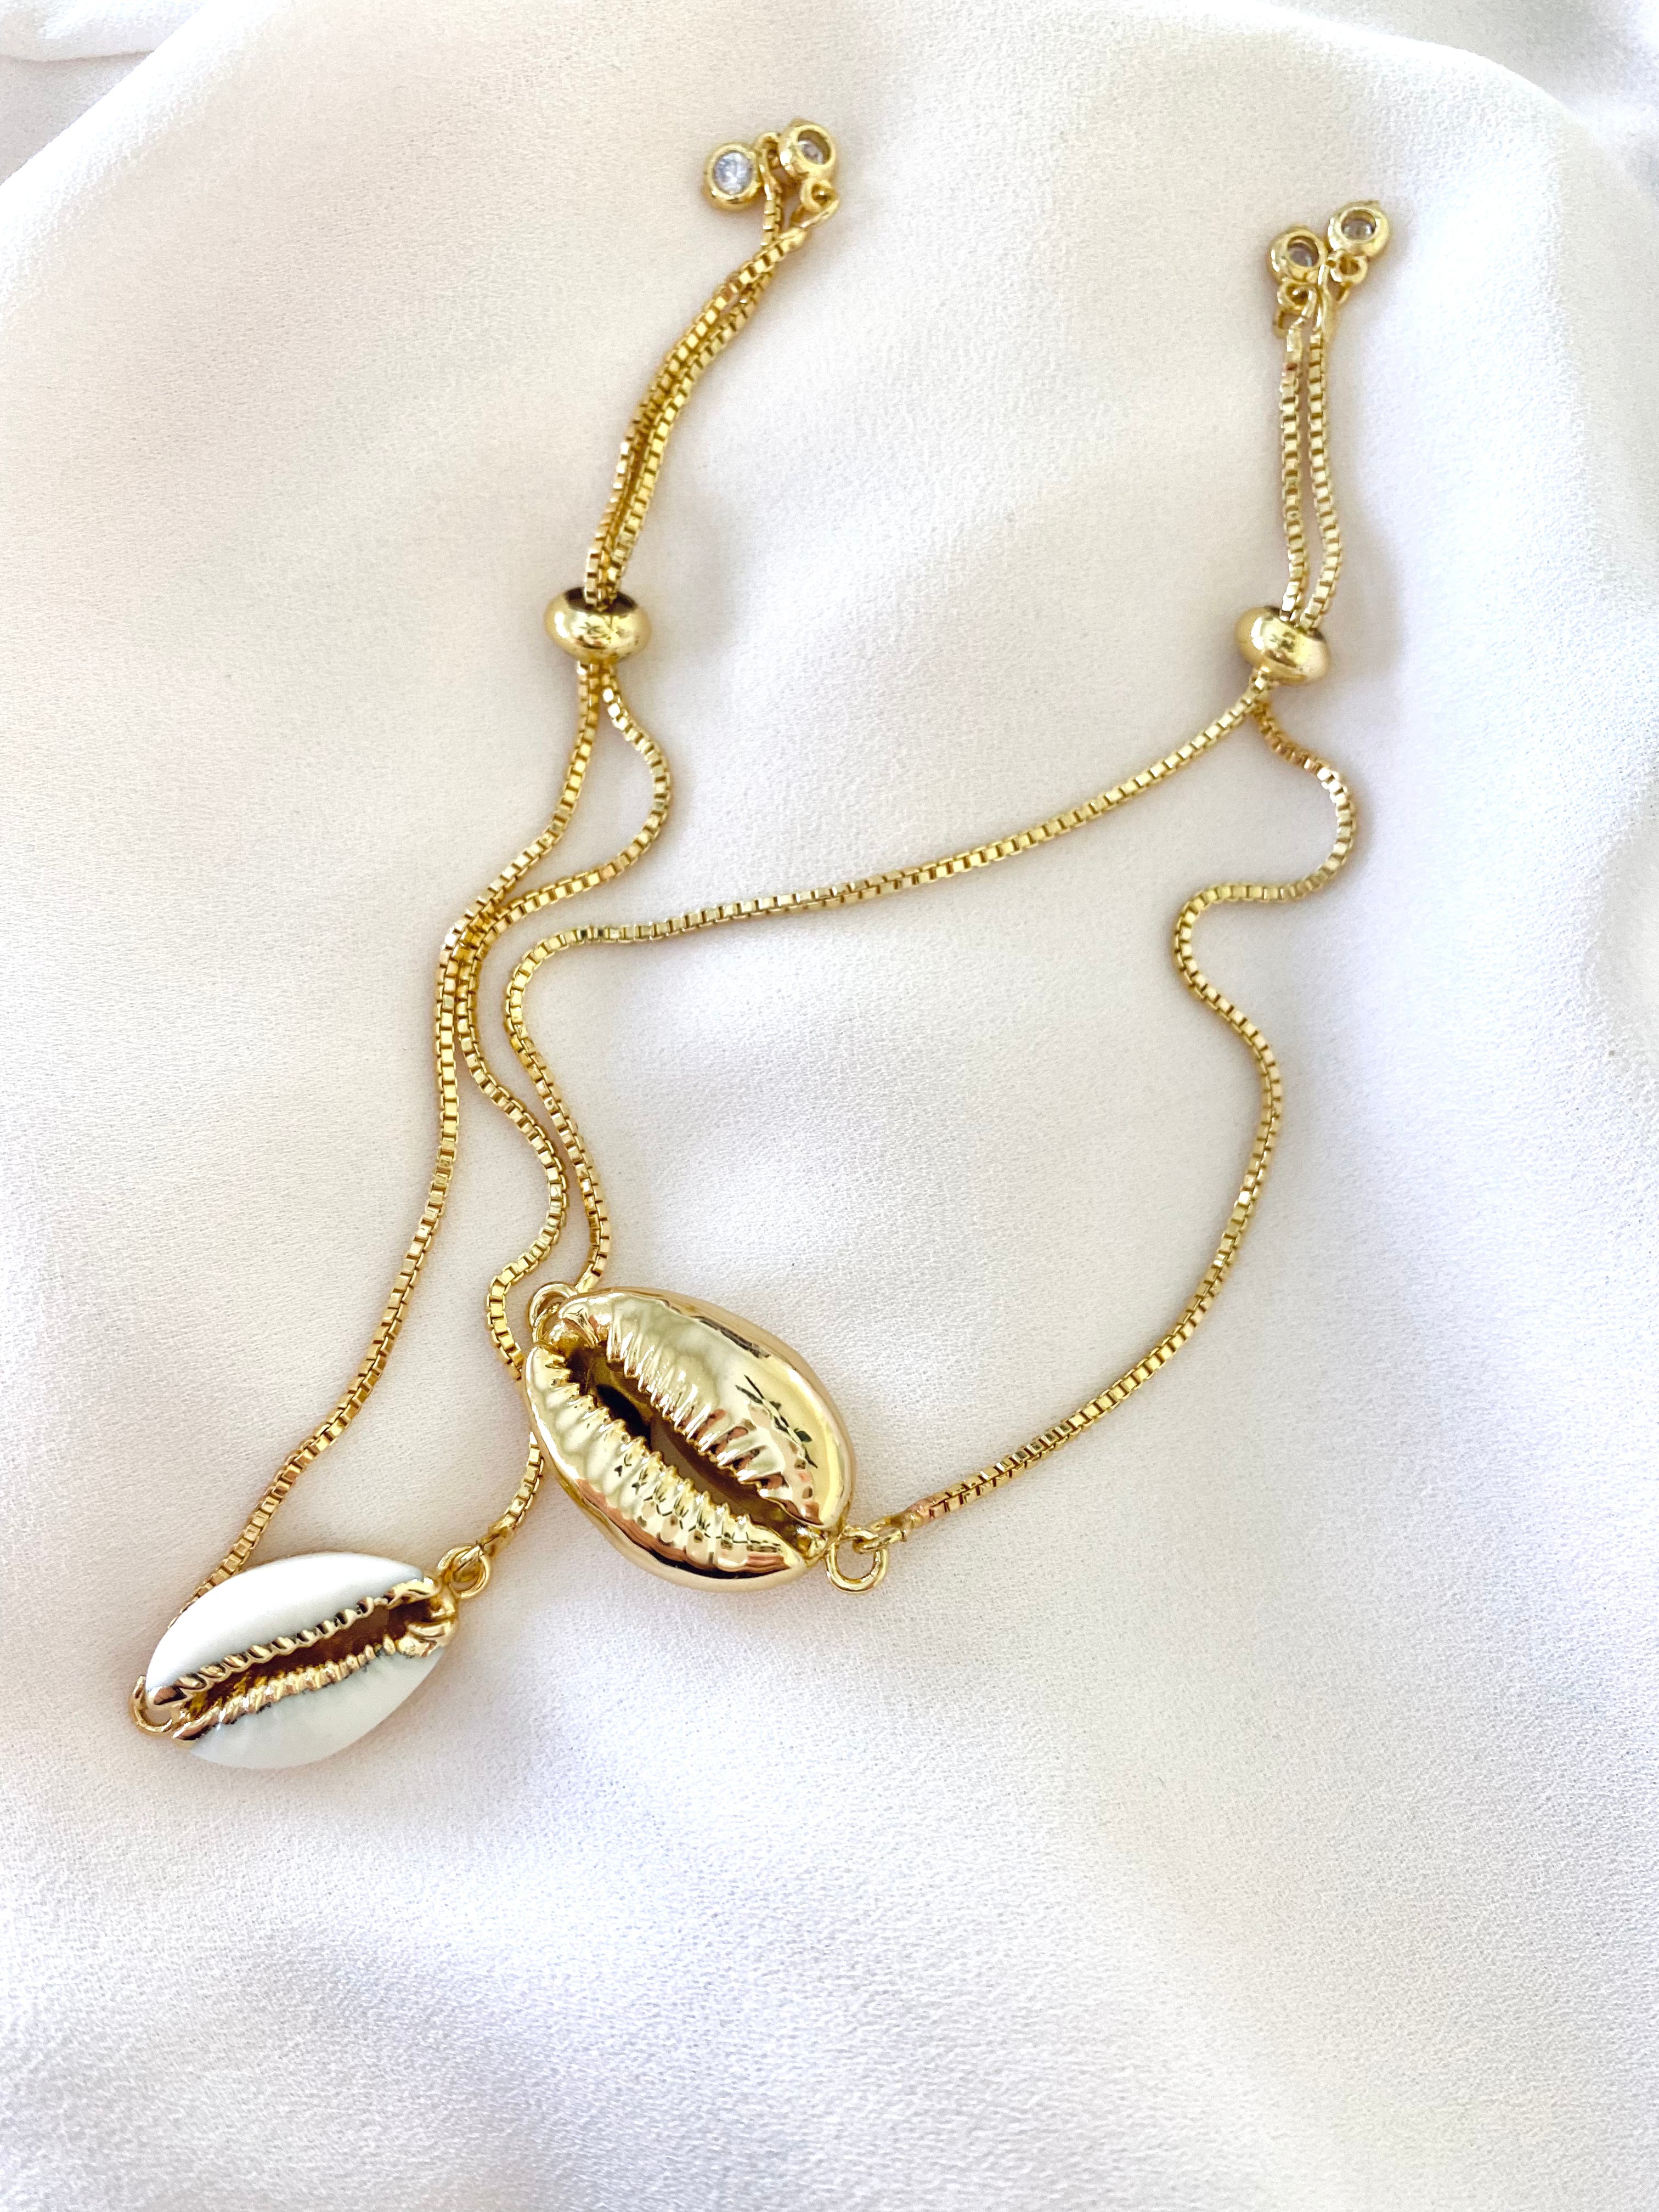 Genuine Cowrie Shell Gold Dipped Bracelet - Adjustable